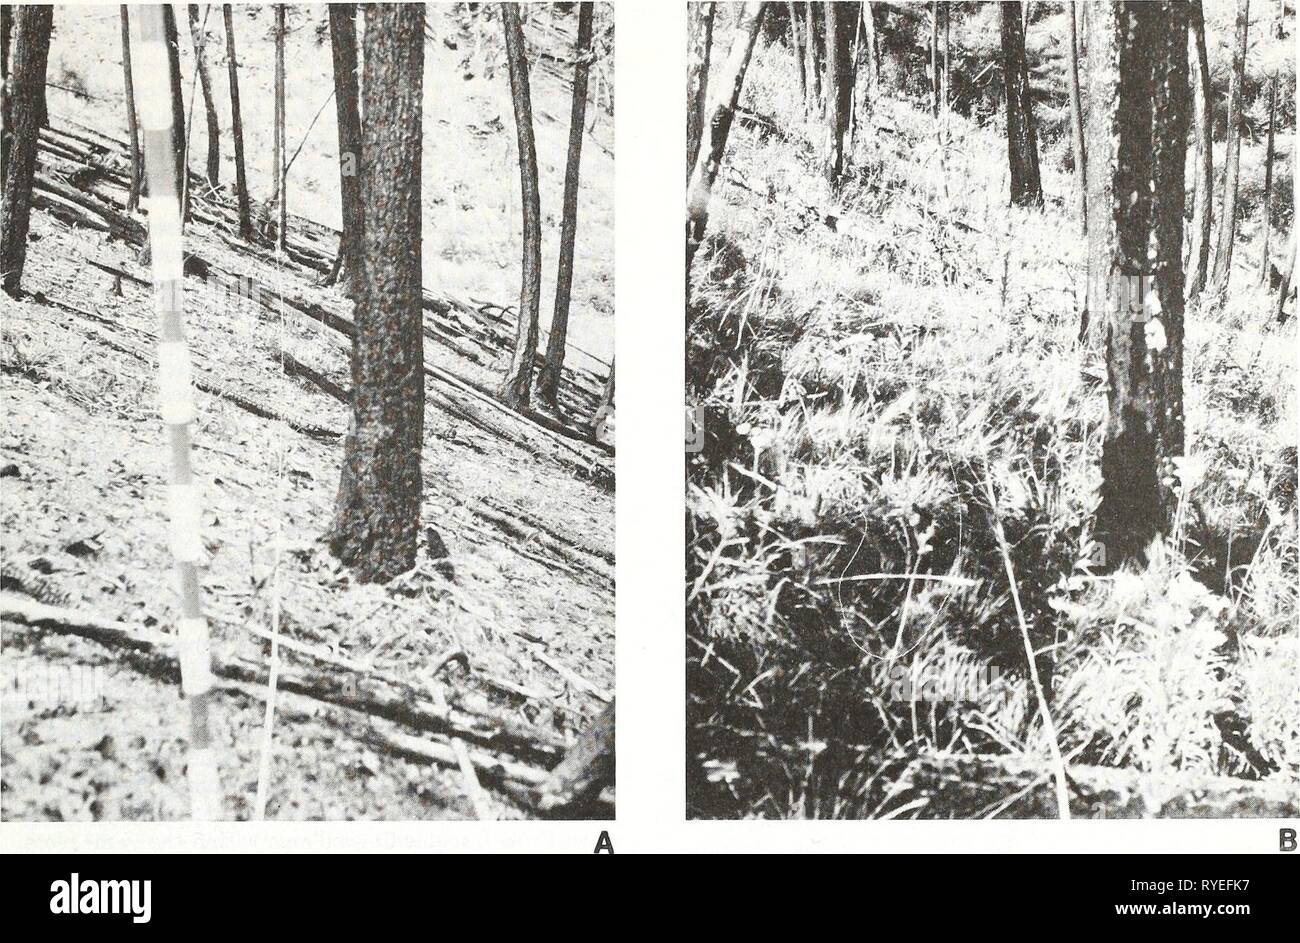 Early postfire revegetation in a western Montana douglas-fir forest  earlypostfirerev319cran Year: 1983    Figure 8.—Stand 24 on the west edge of the fire is an example of an area that did not have seeded grass initially, (a) Stand 24 in July 1978; (b) stand 24 in August 1982. Table 6.—Conifer regeneration as counted in herbaceous vegetation plots within Pattee Canyon stands. Plot area is 6 yd^ (5 m2) per stand. Species unknown except as indicated (PSME = Pseudotsuga menziesii; PICO = Pinus contorta and LAOC = Larix occidentalis) Vegetation plots 1978 1978 1979 1982 Stand spring summer summer  Stock Photo